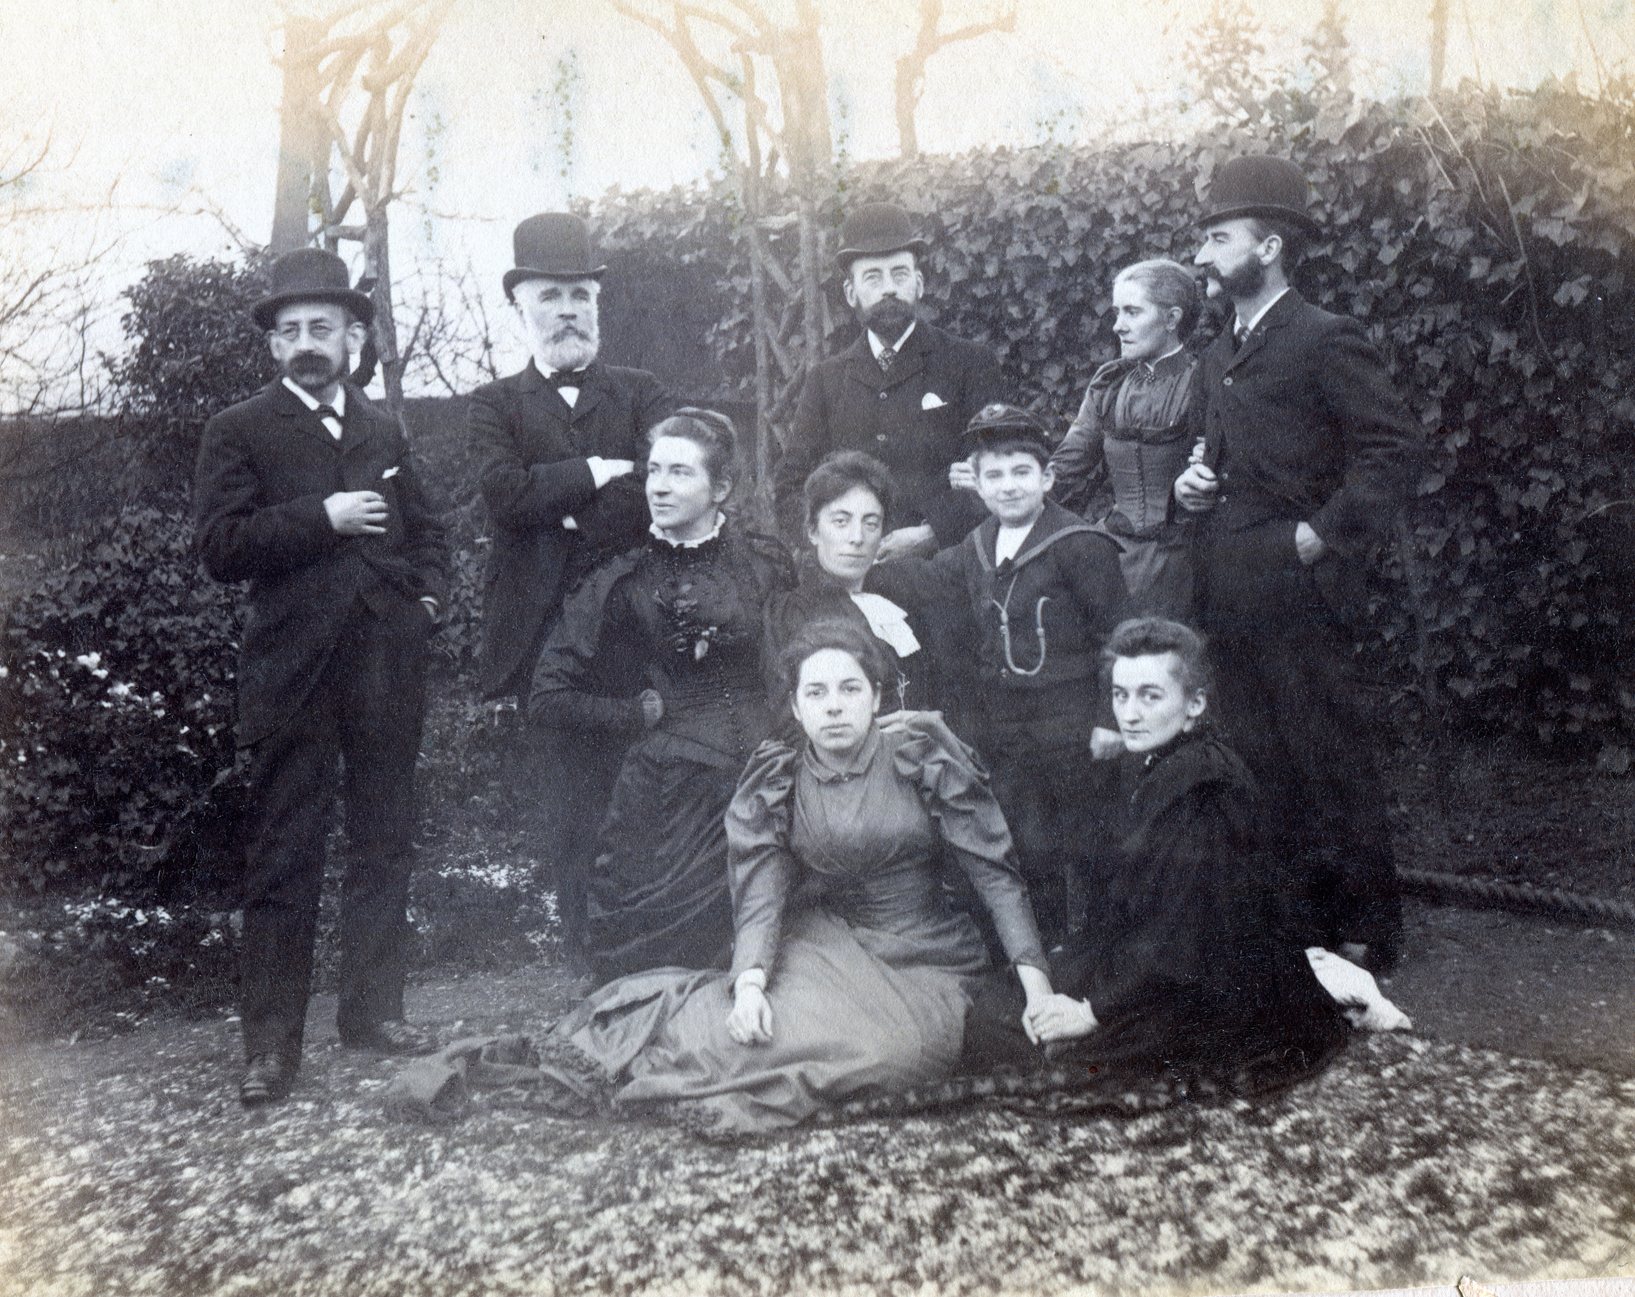 Left to right: (back) Fred Enock (uncle), Henry Dell (father), Robinson Enock (uncle), Emily Enock (auntie), Edwin Enock (uncle), (middle) Jennie Enock (uncle Fred's wife), Eleanor Enock (uncle Robinson's wife), Roy Enock (cousin - uncle Edwin and Emily's son) (front) Amy Dell, Jane Enock (cousin Guy Enock's wife) c1891